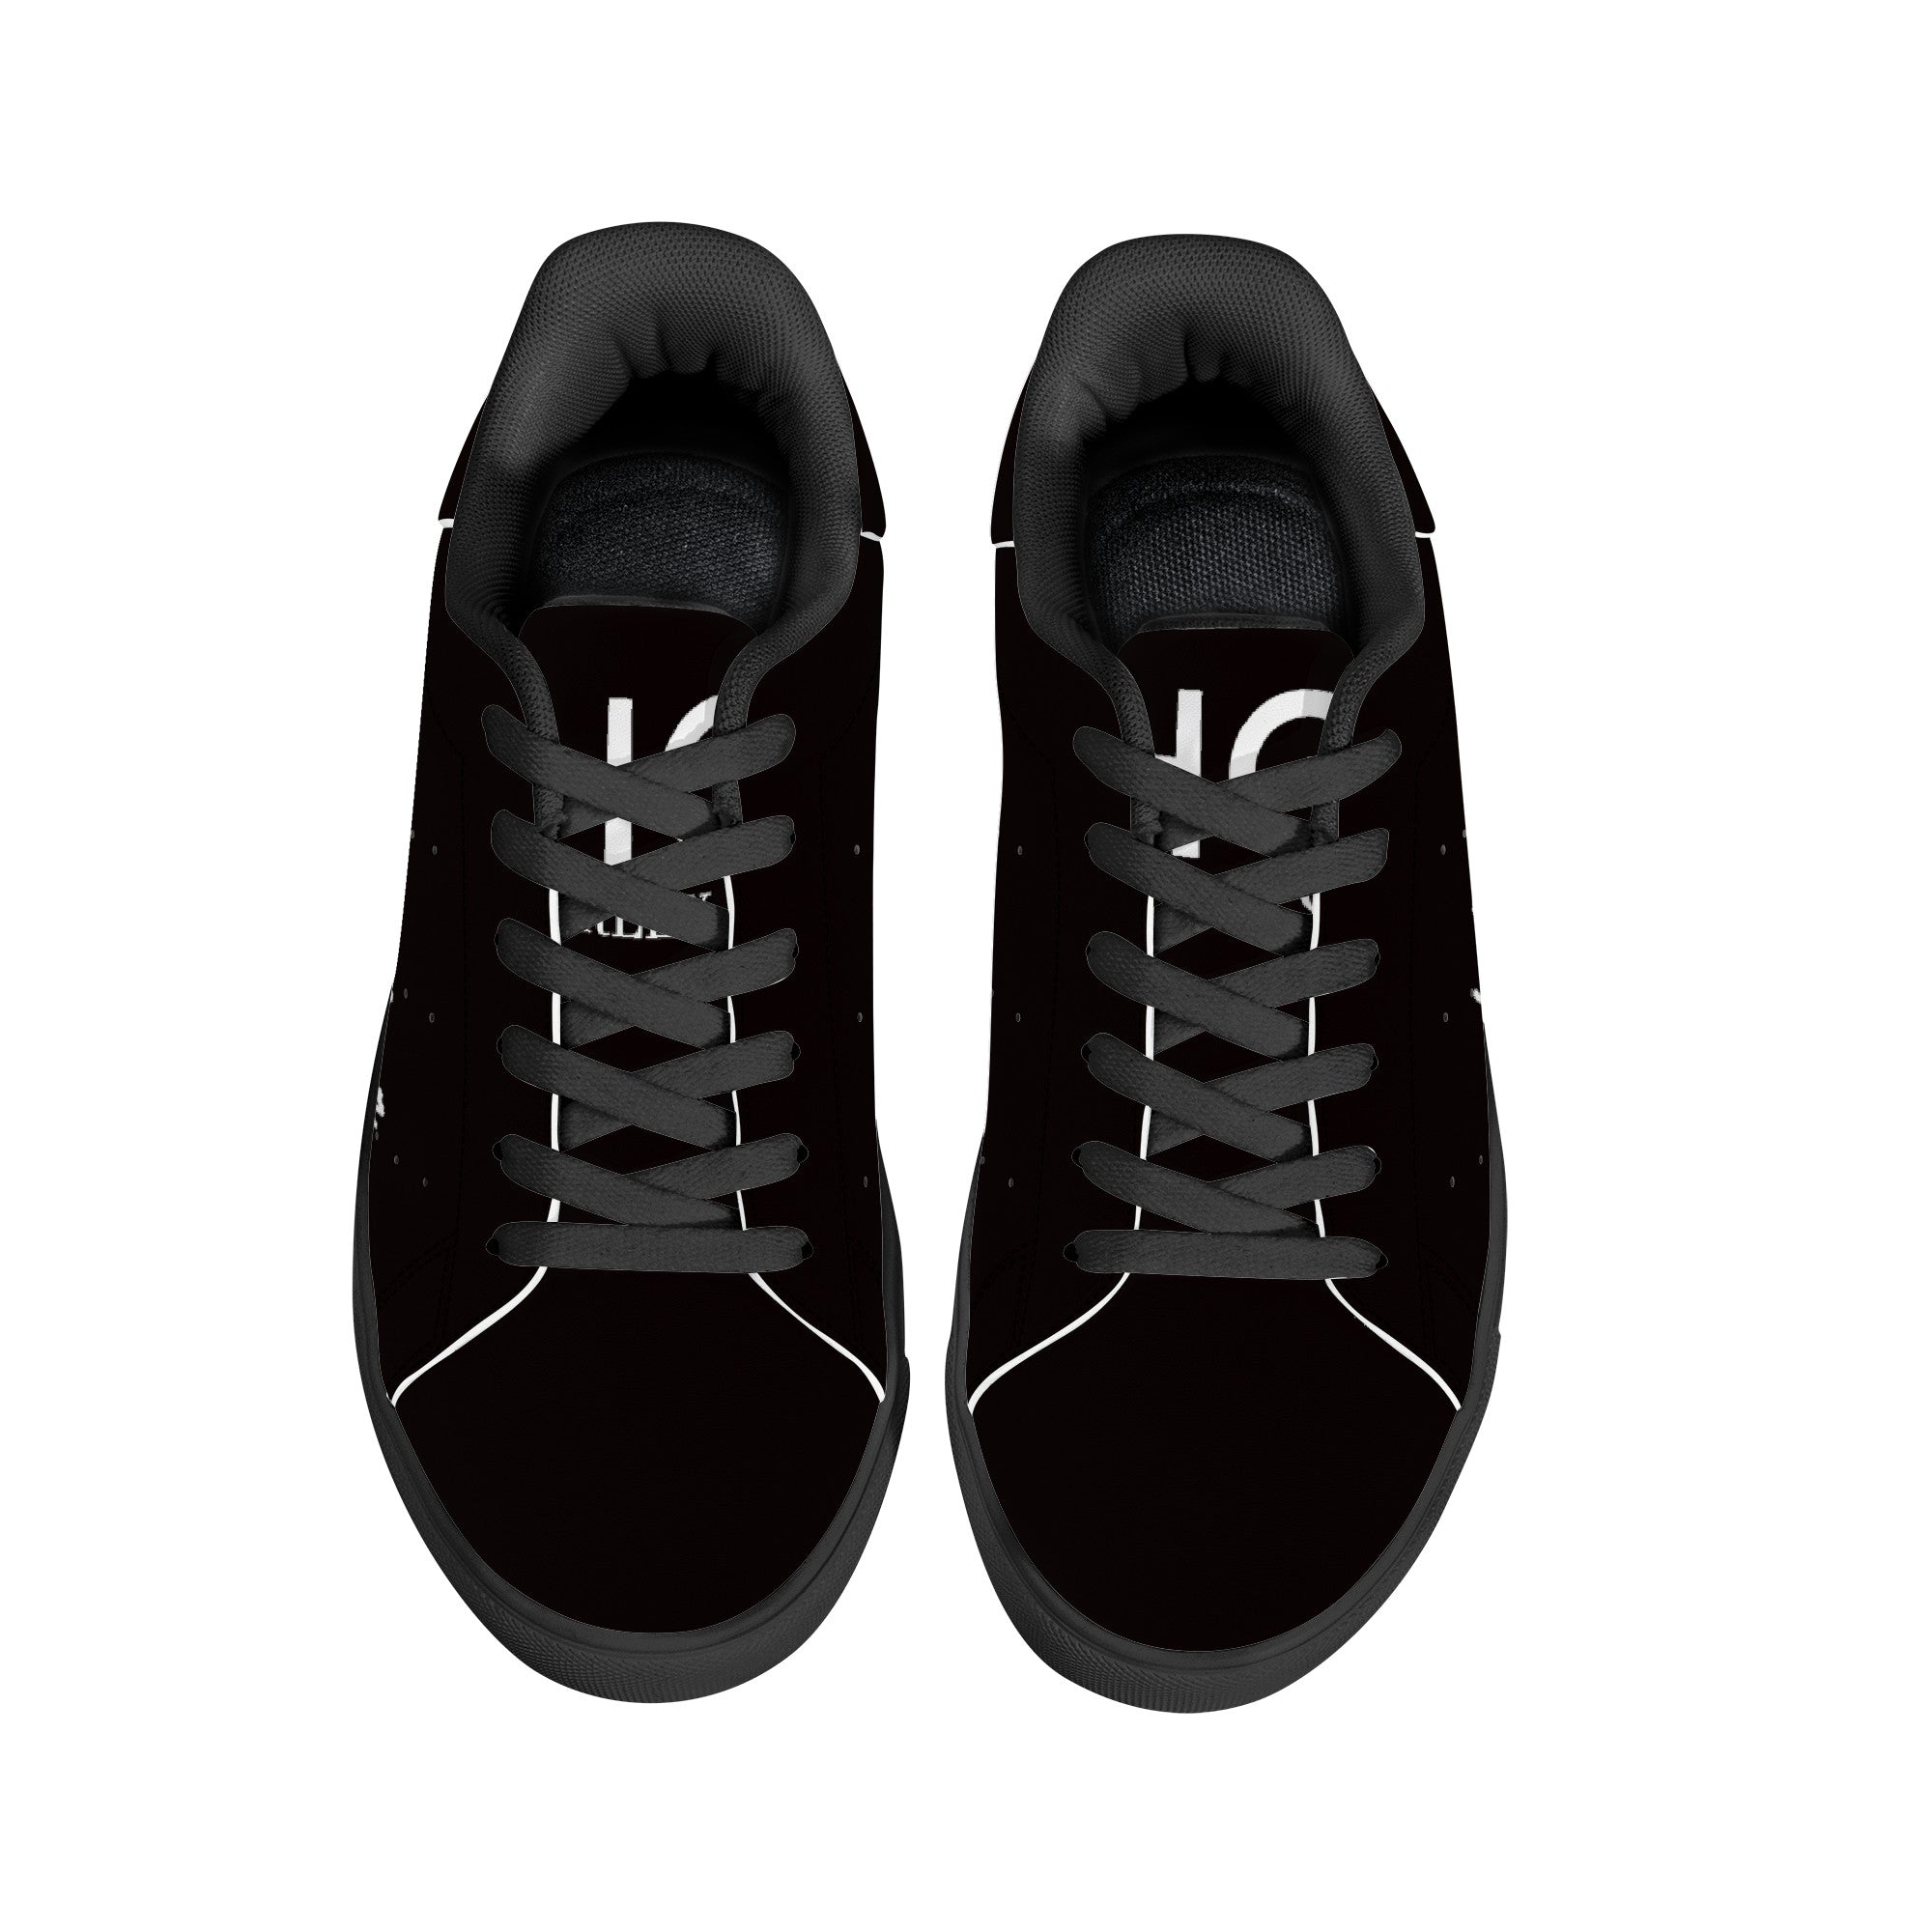 Harley G Signature Leather Sneakers | Low Top Customized | Shoe Zero